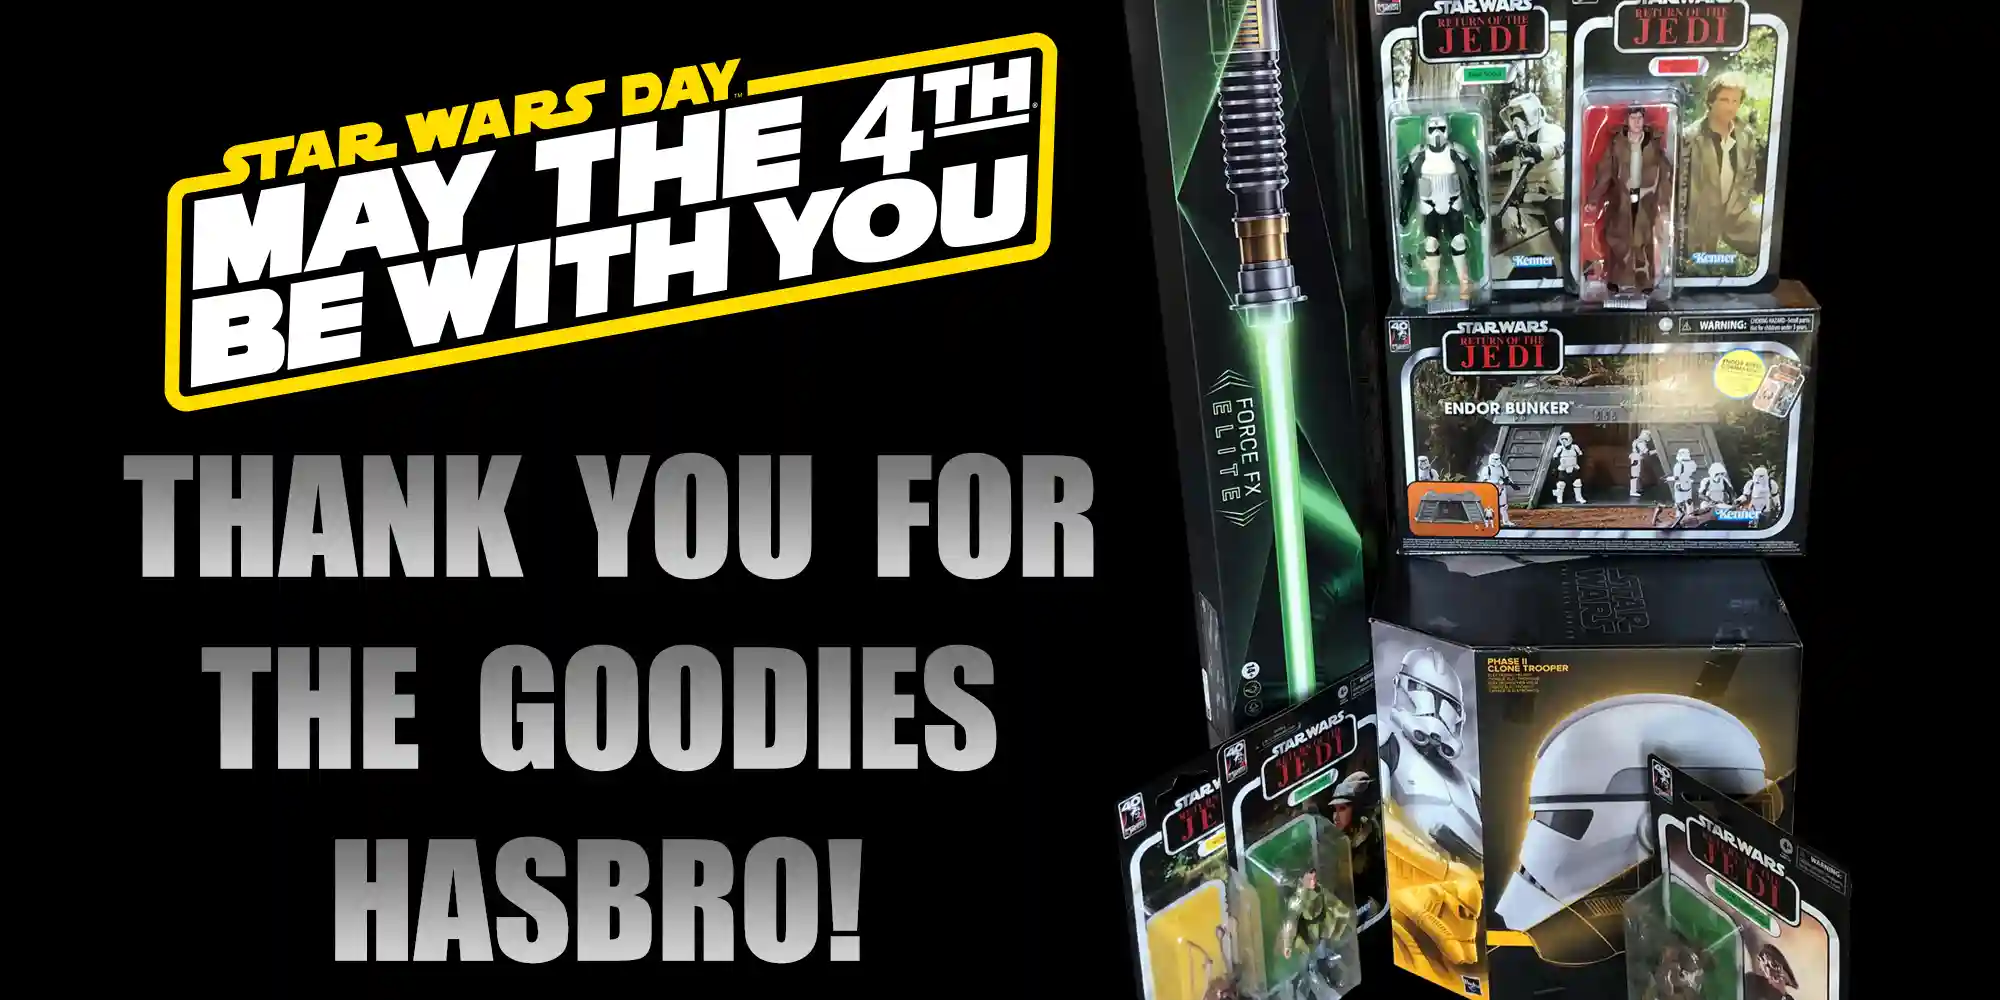 Happy Early May The 4th And Thank You Hasbro!